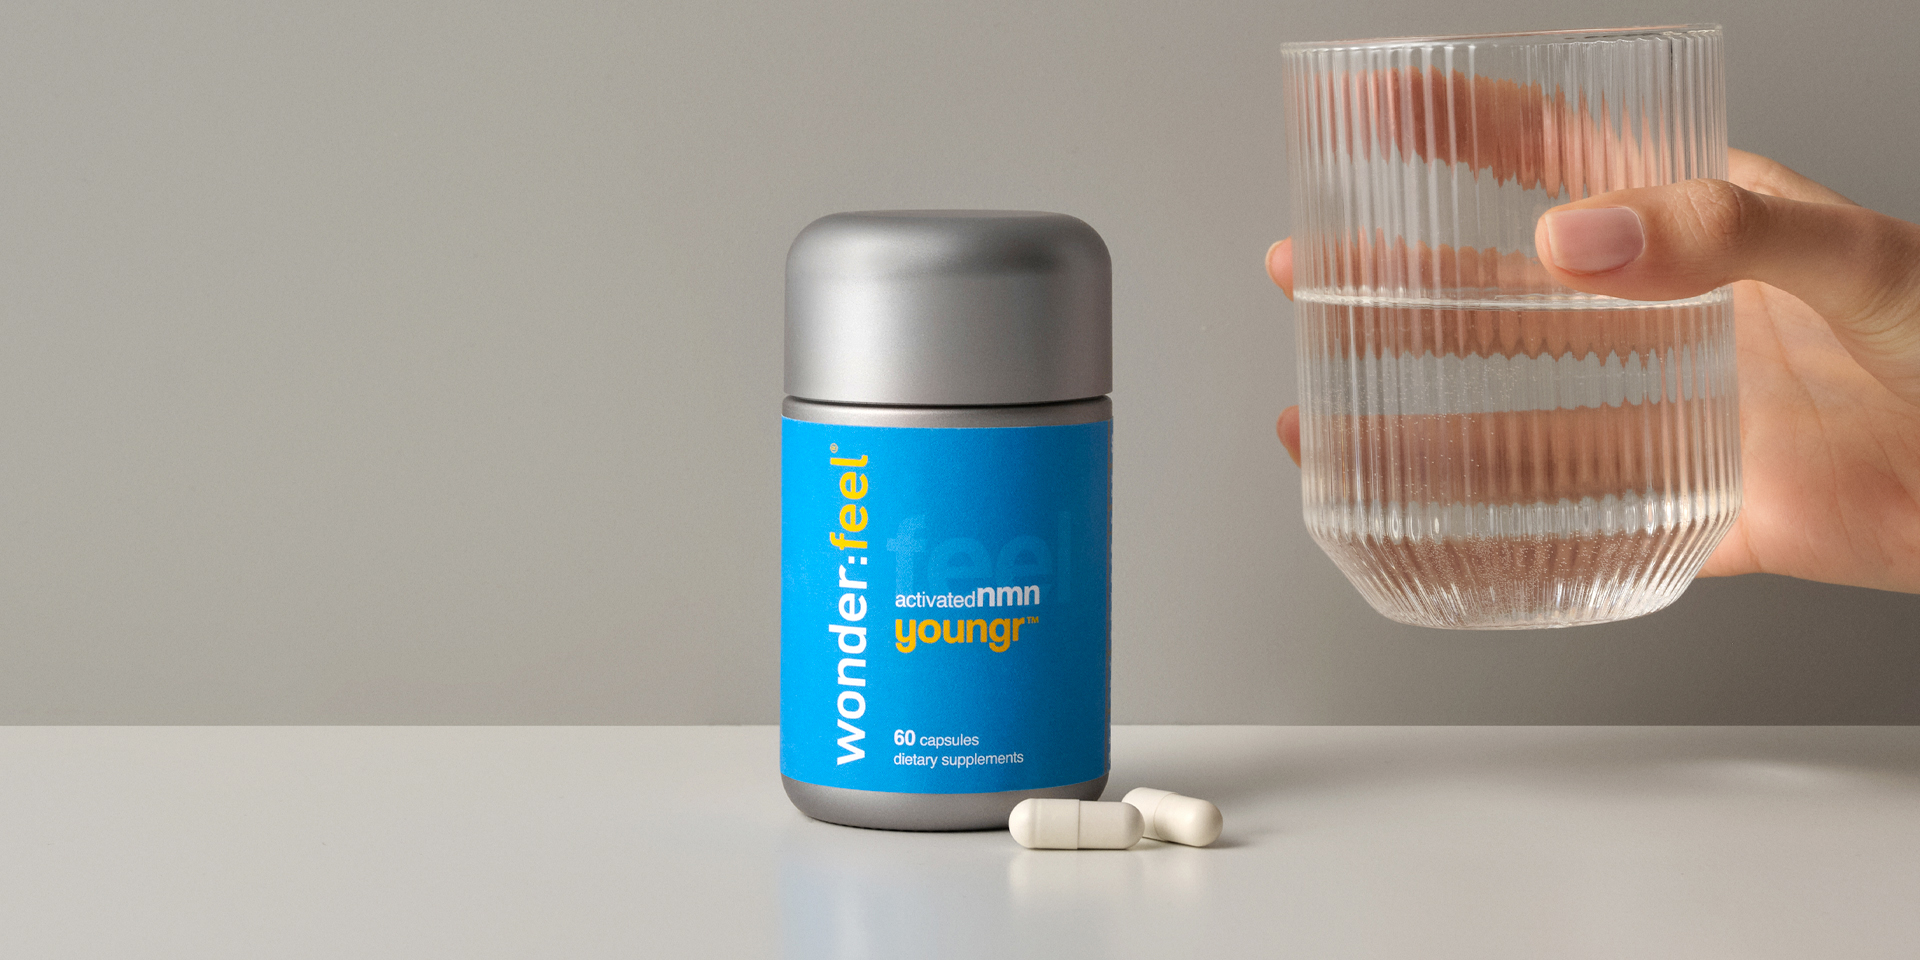 Wonderfeel Youngr NMN, two capsules daily usage